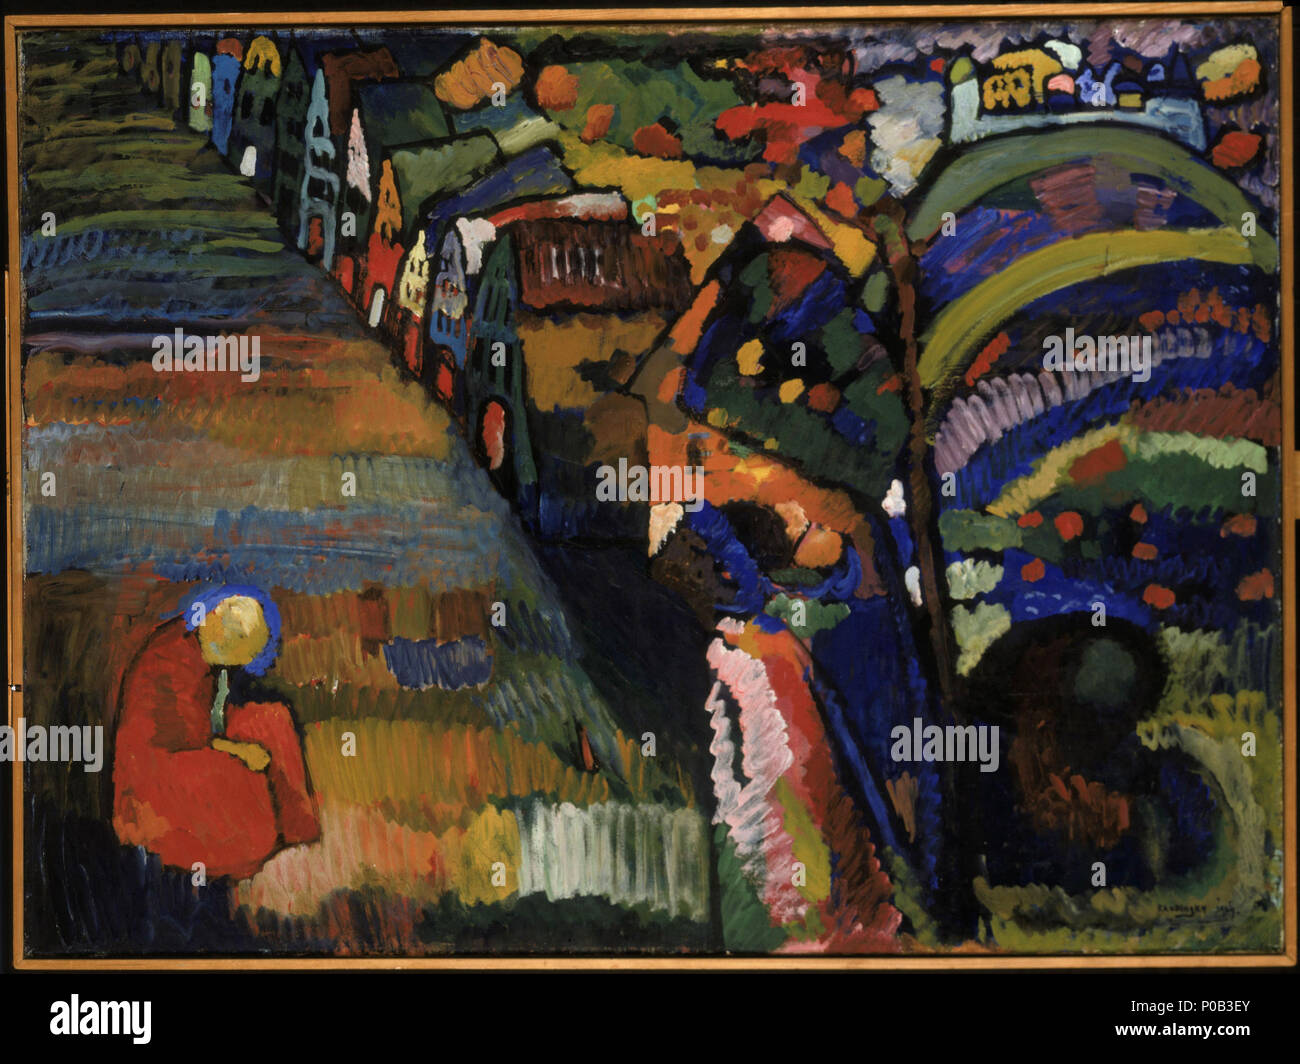 Netherlands Looted Art This photo provided by Stedelijk Museum in Amsterdam on Tuesday, Oct. 29, 2013, shows the 1909 painting Image with Houses by Wassily Kandinsky. Dutch museums have identified 139 pieces of art, including dozens of paintings, one by Matisse and many by Dutch painters of varying renown such as Impressionist Isaac Israels, as likely having been taken forcibly from Jewish owners. (AP Photo/Stedelijk Museum) 116 Кандинский Картина с домами Stock Photo